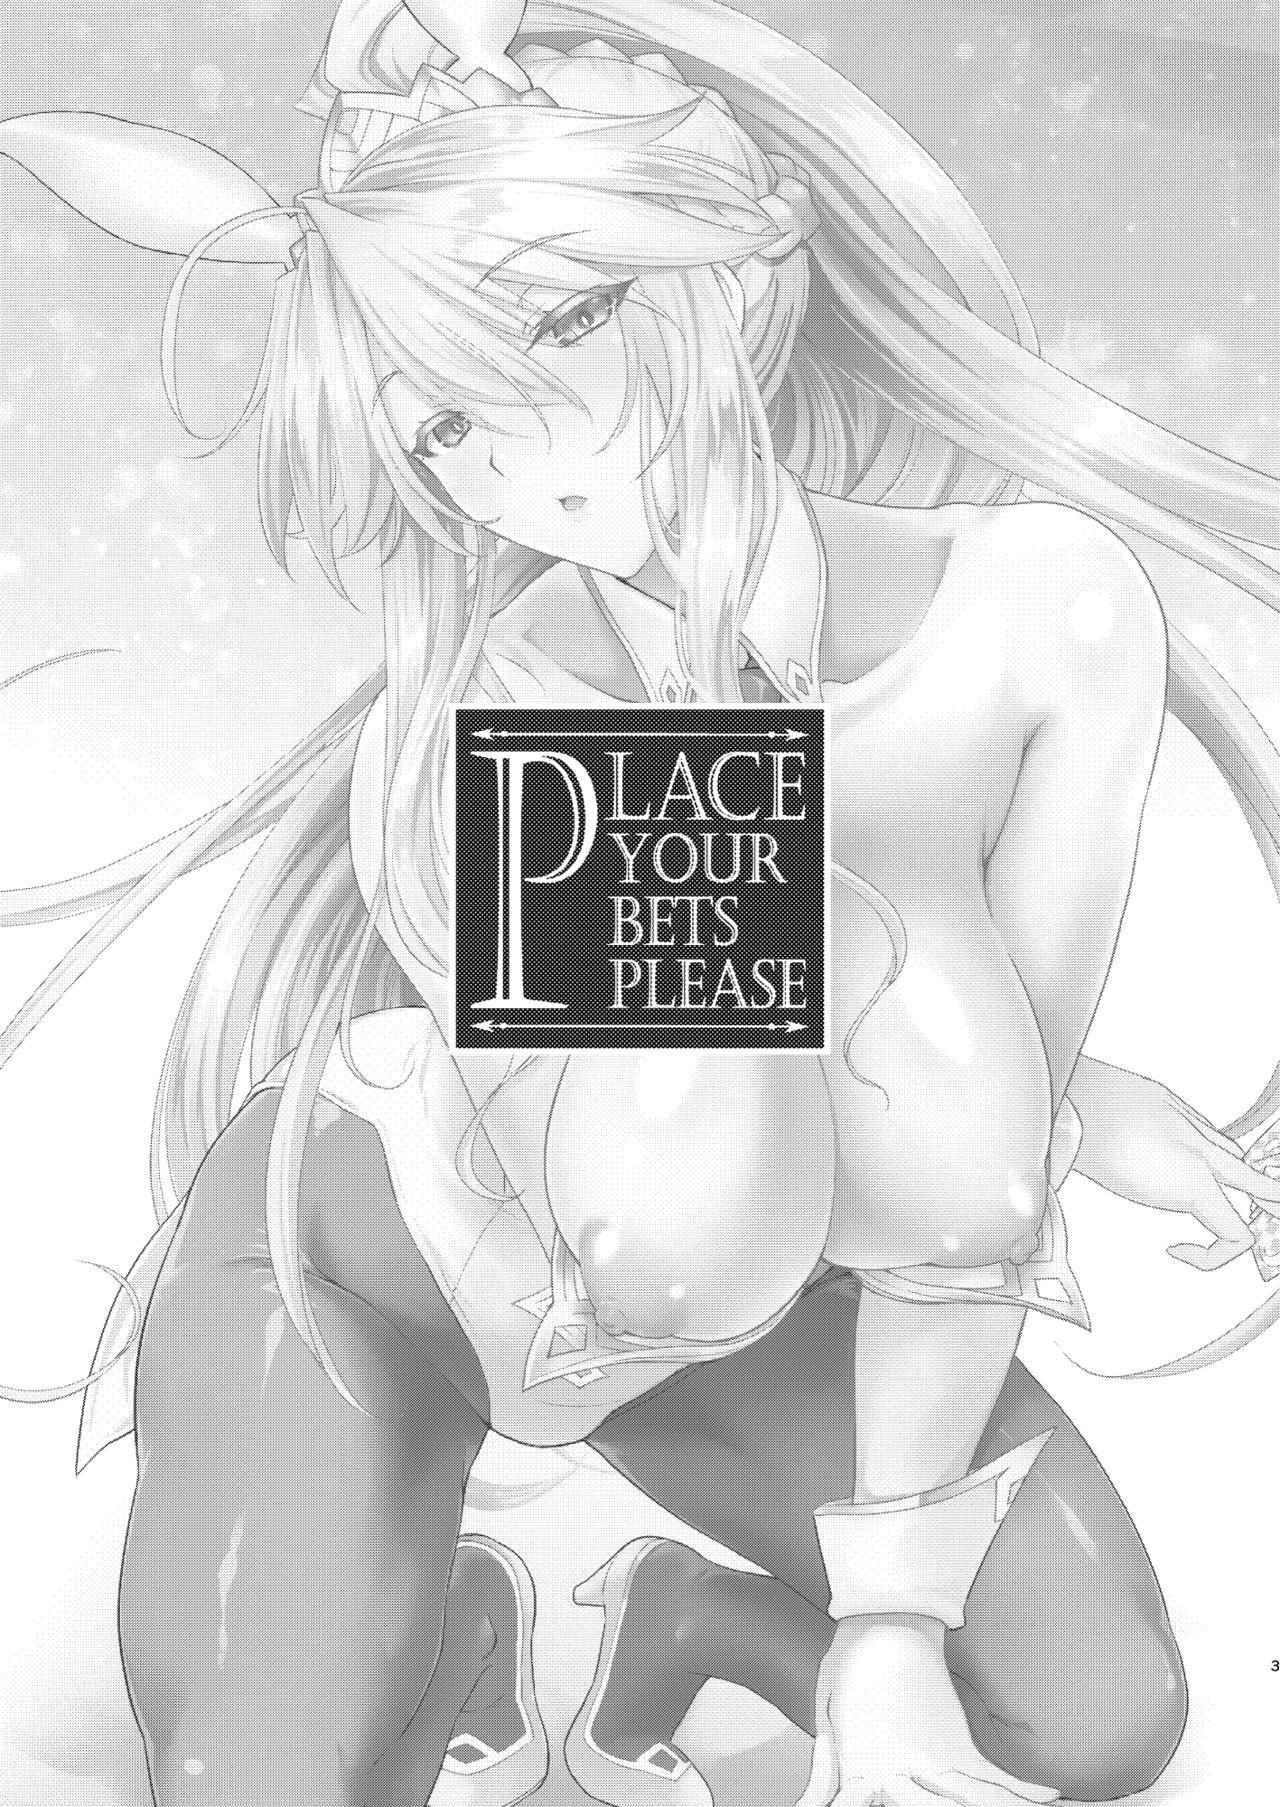 Pussy Lick Place your bets please - Fate grand order Oil - Page 3